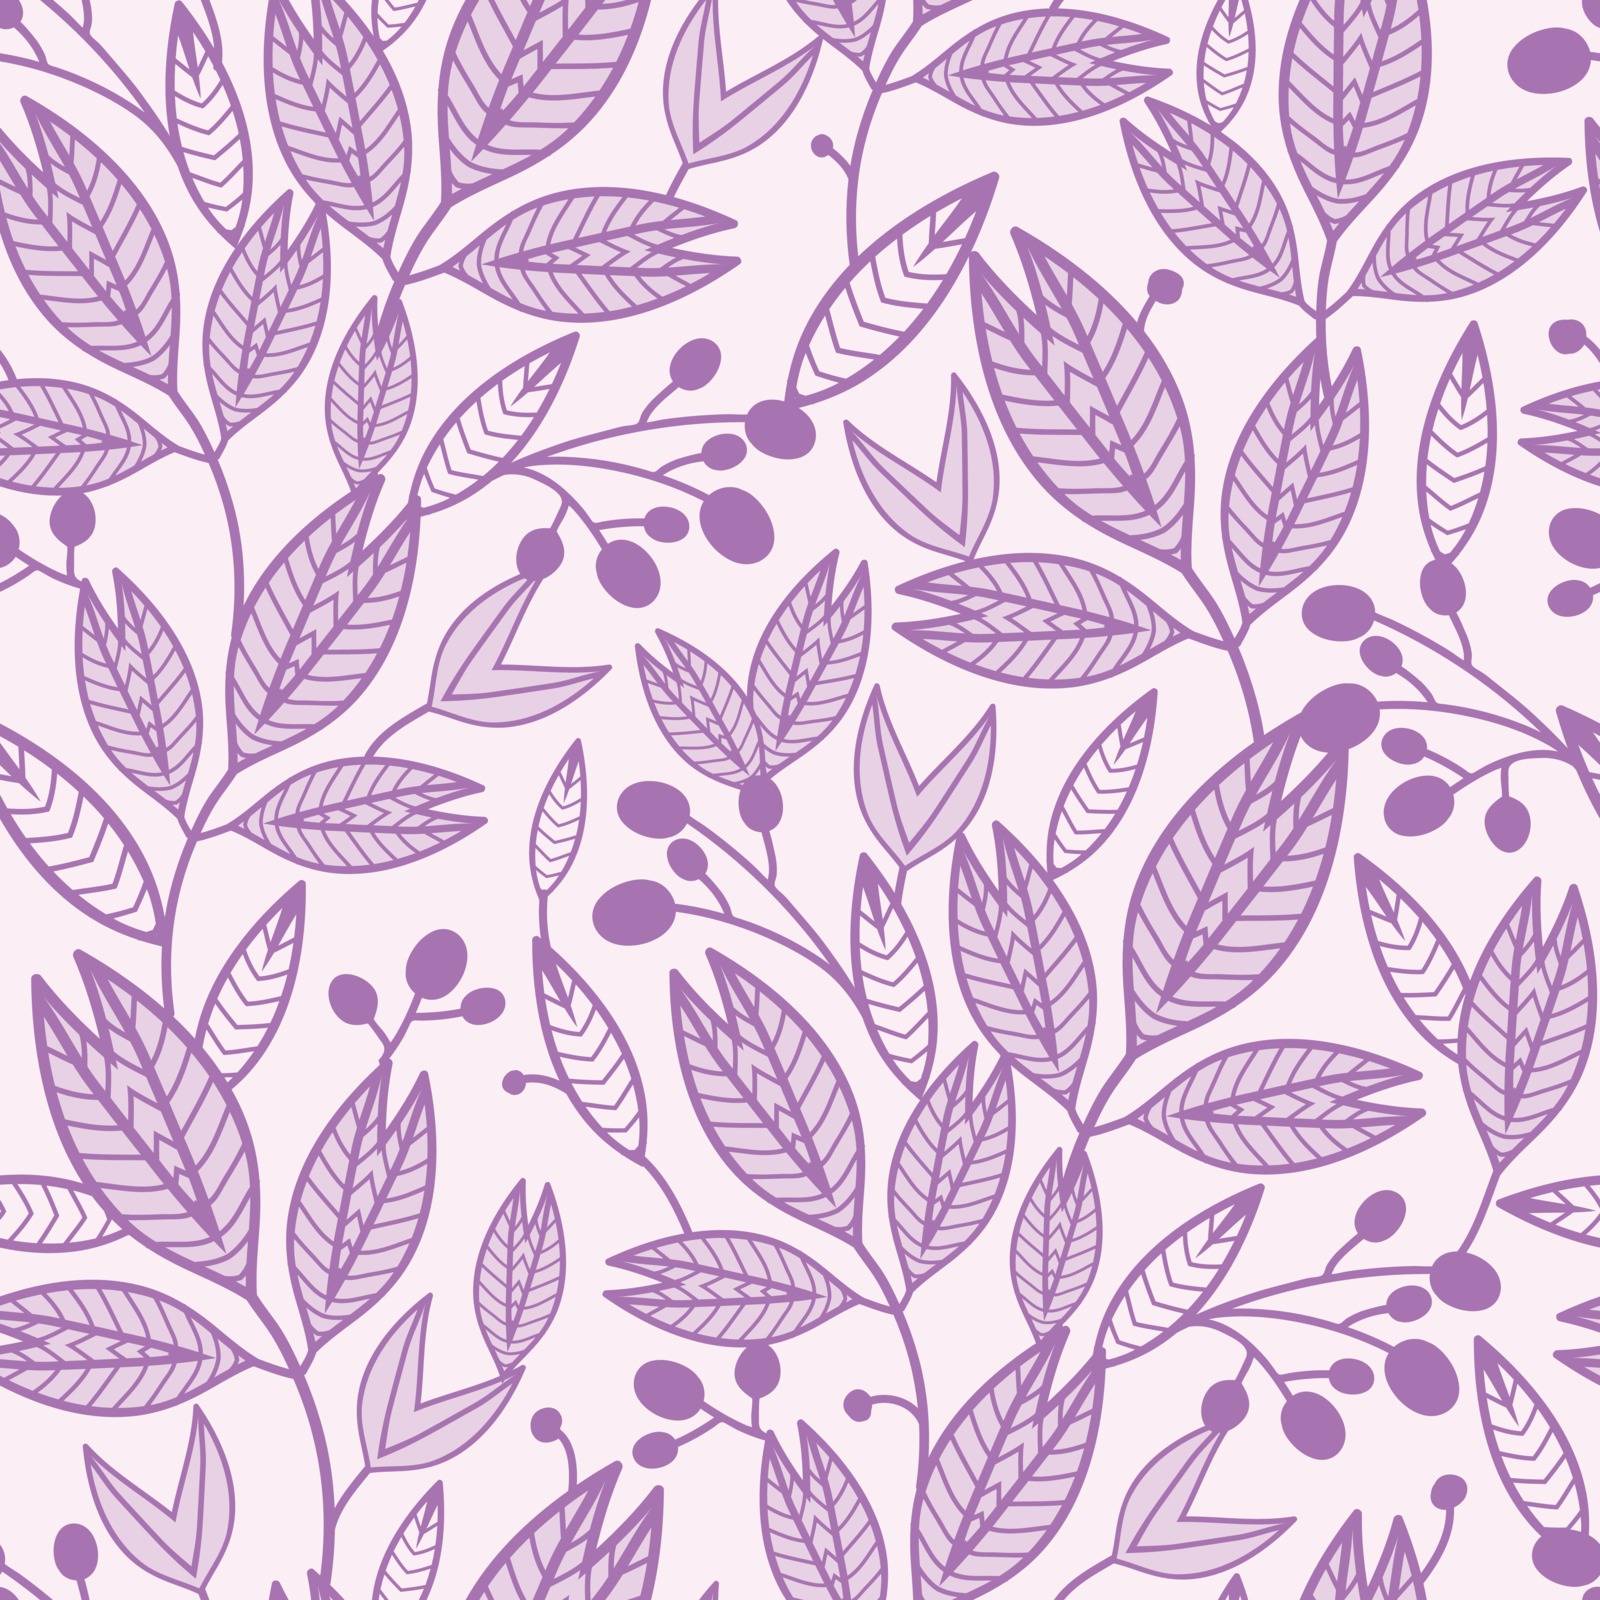 Striped leaves and berries seamless pattern background by Oksancia